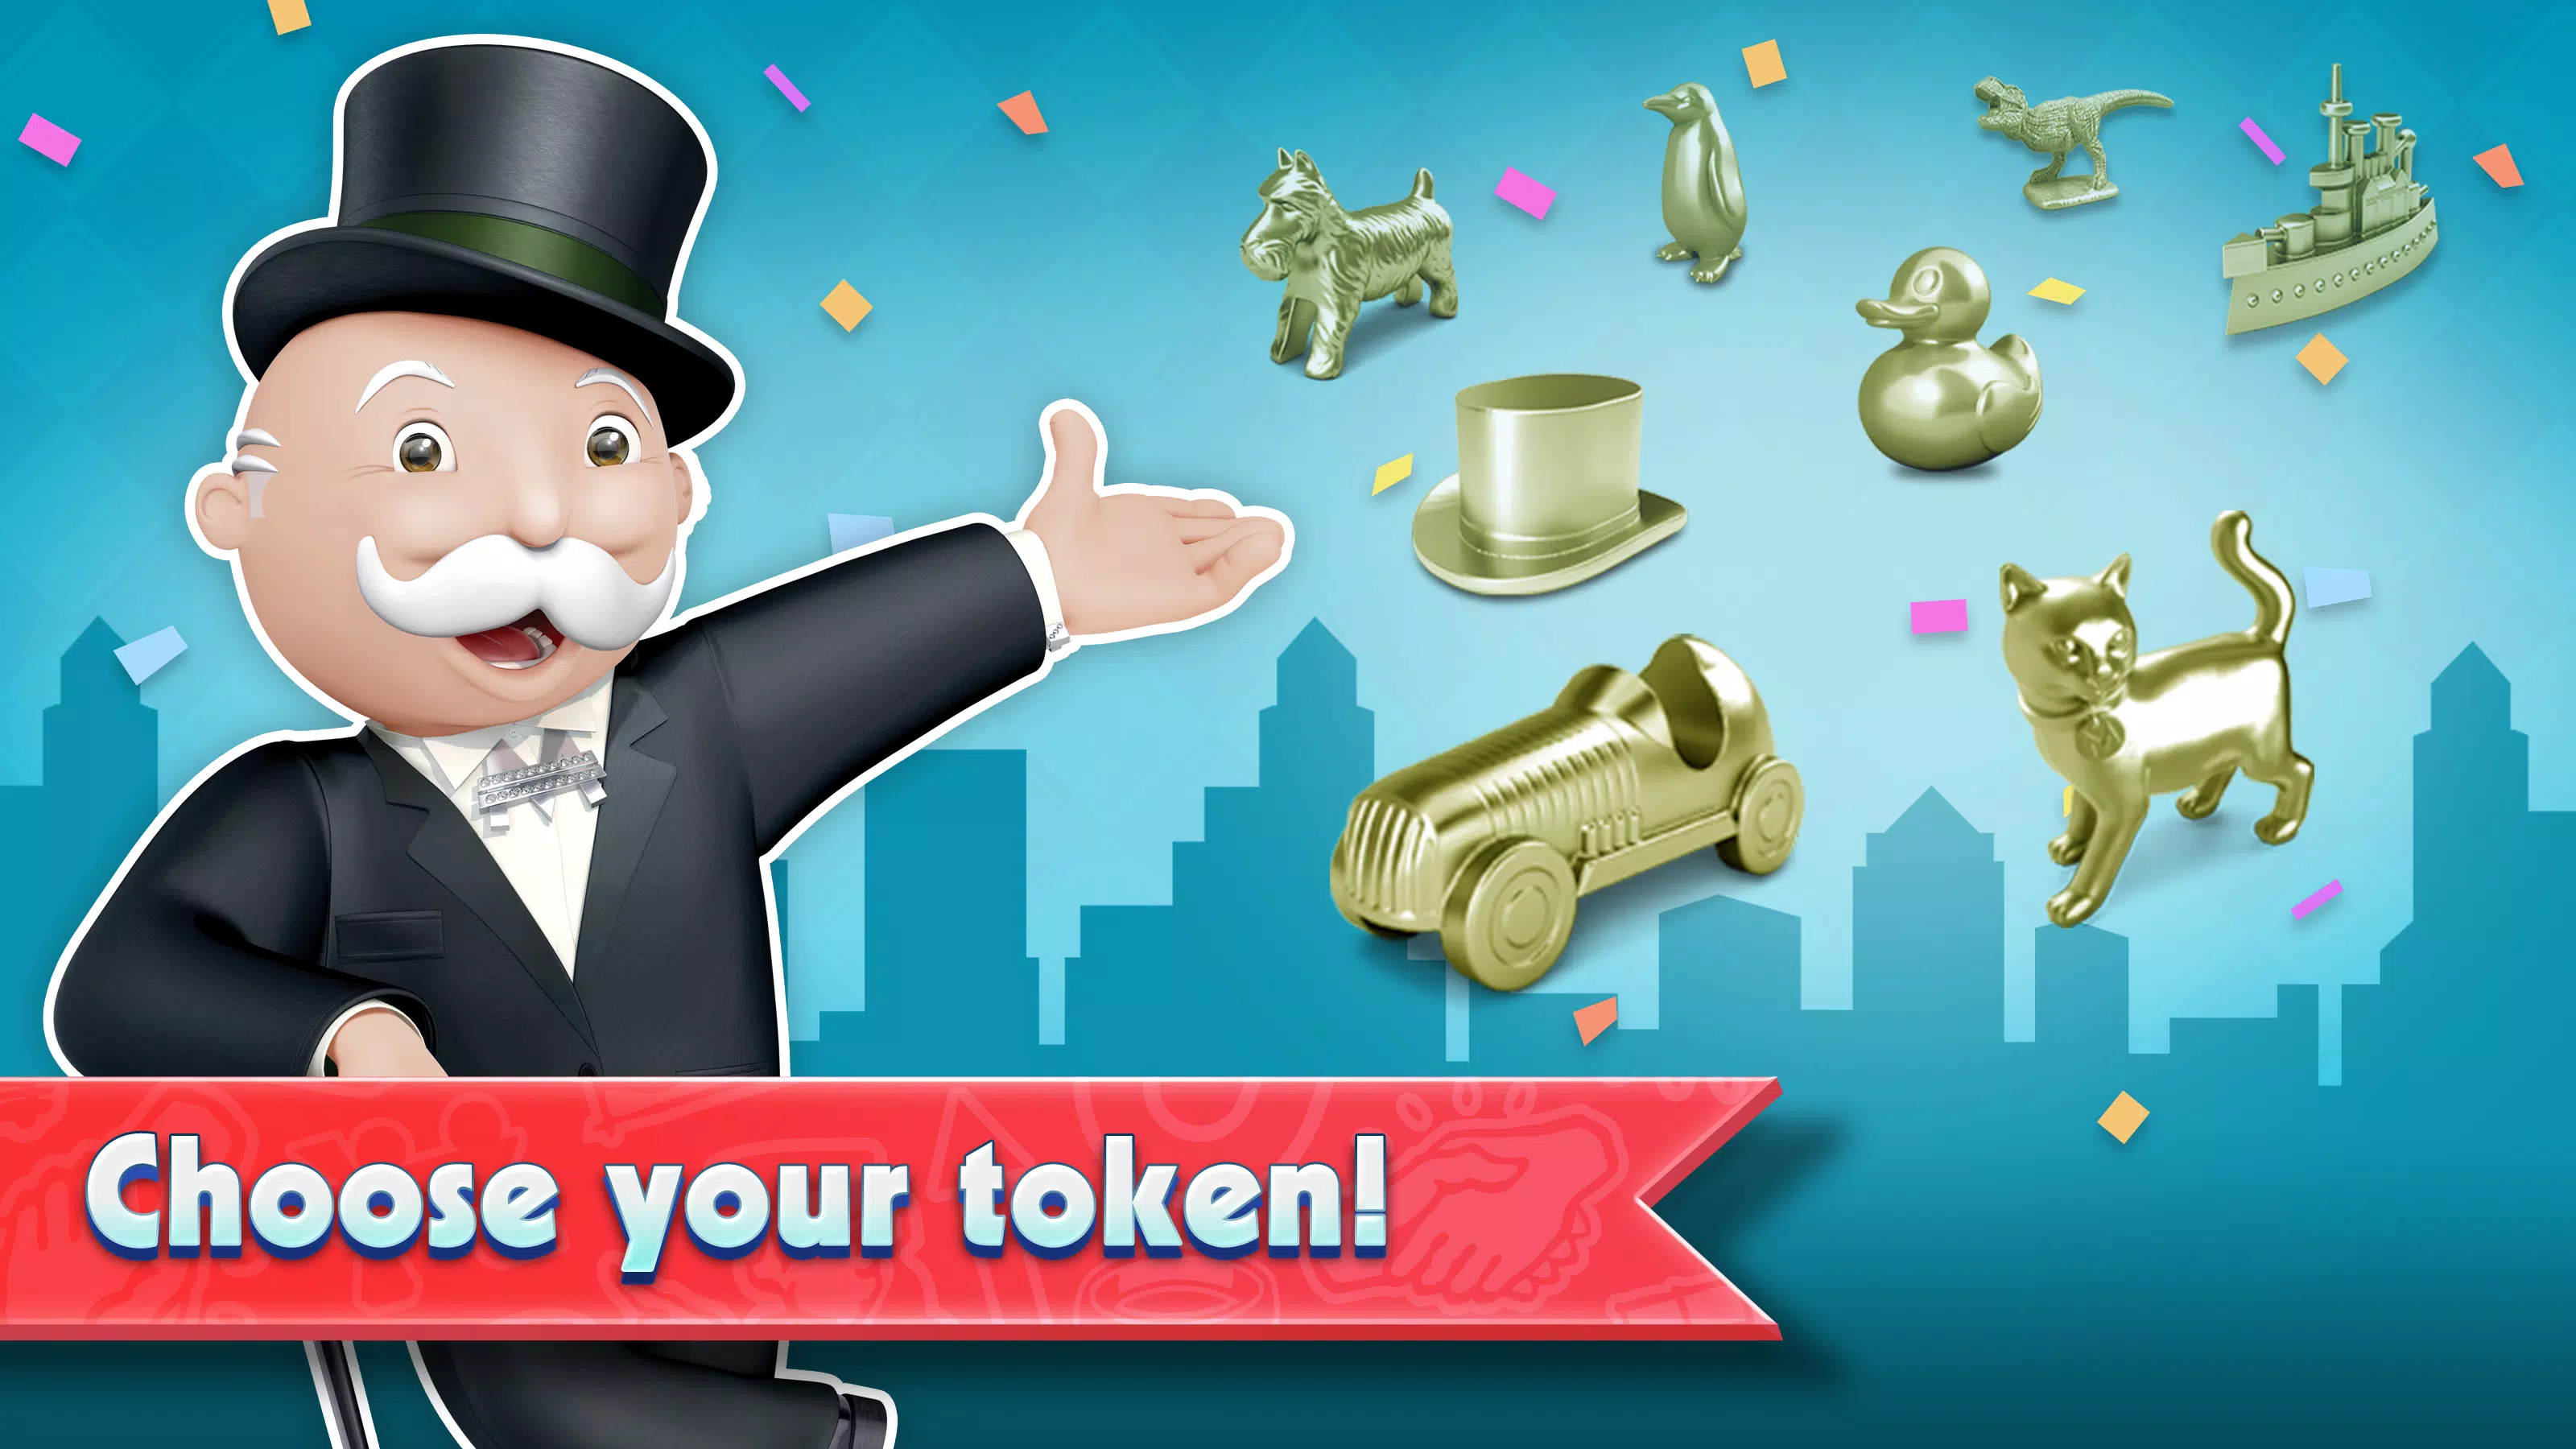 MONOPOLY Tycoon na App Store